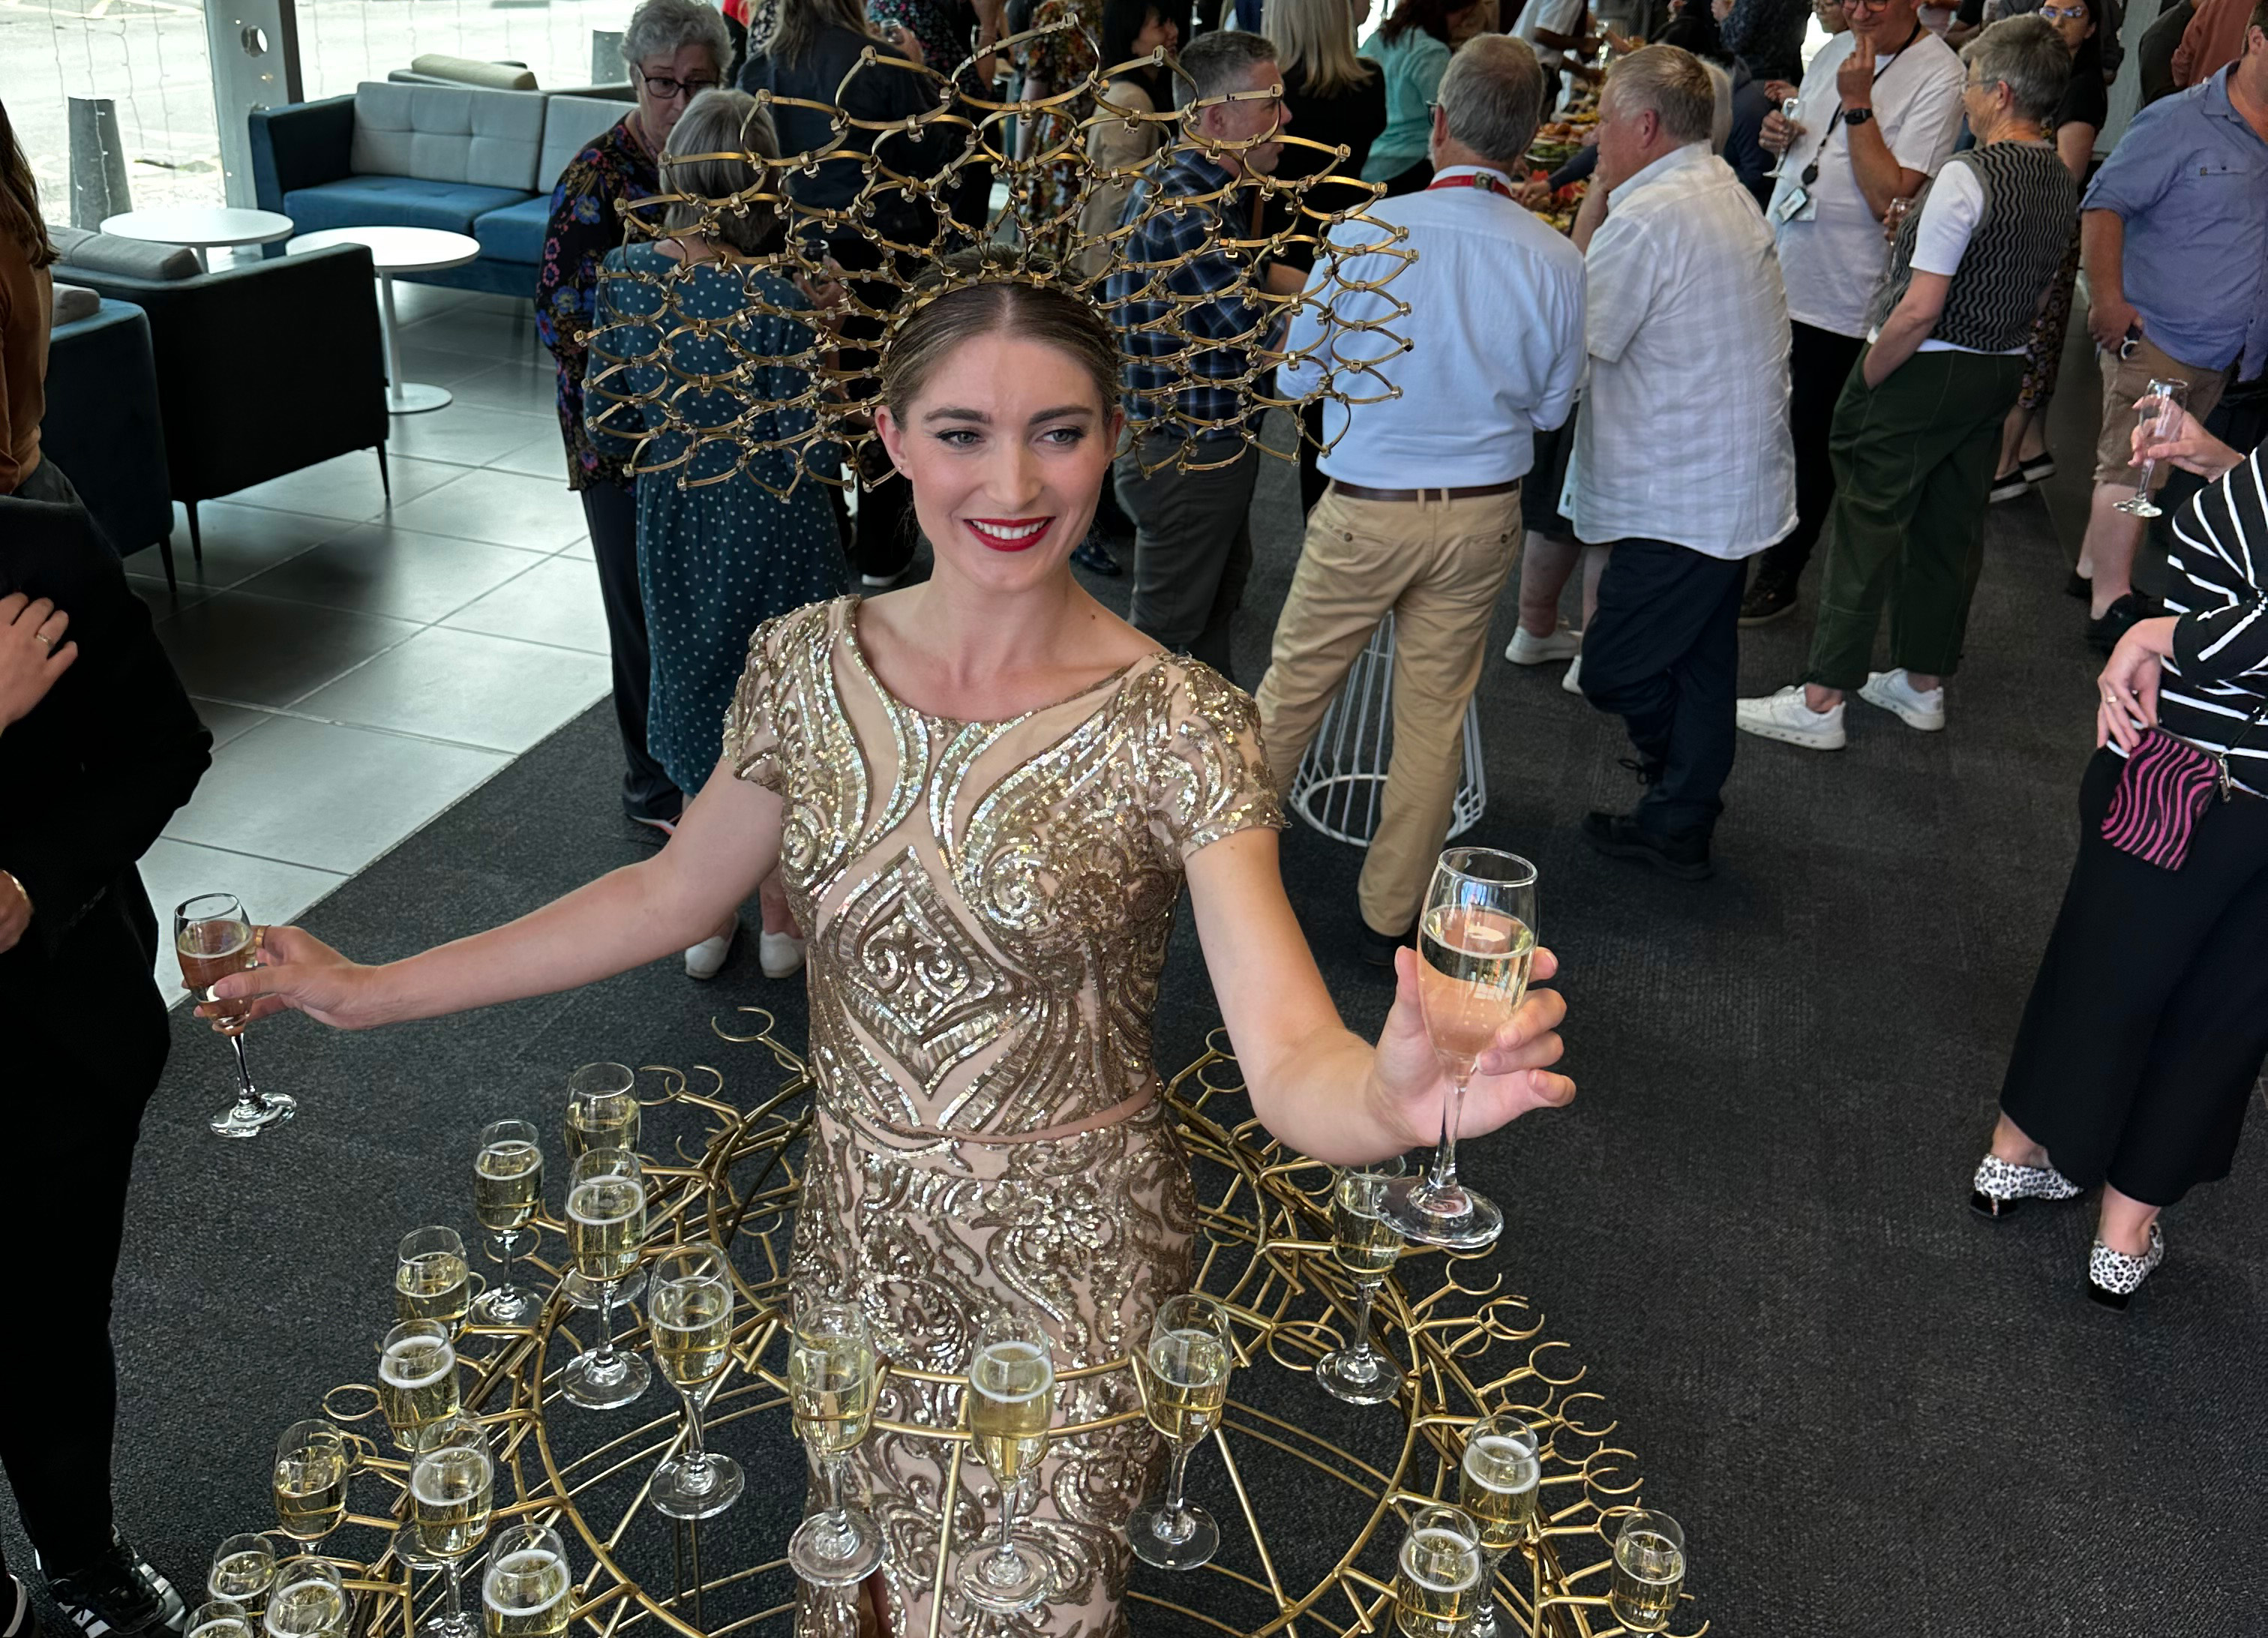 A woman in a gold dress with a hoop skirt that holds many glasses of champagne, with party attendees in the background.